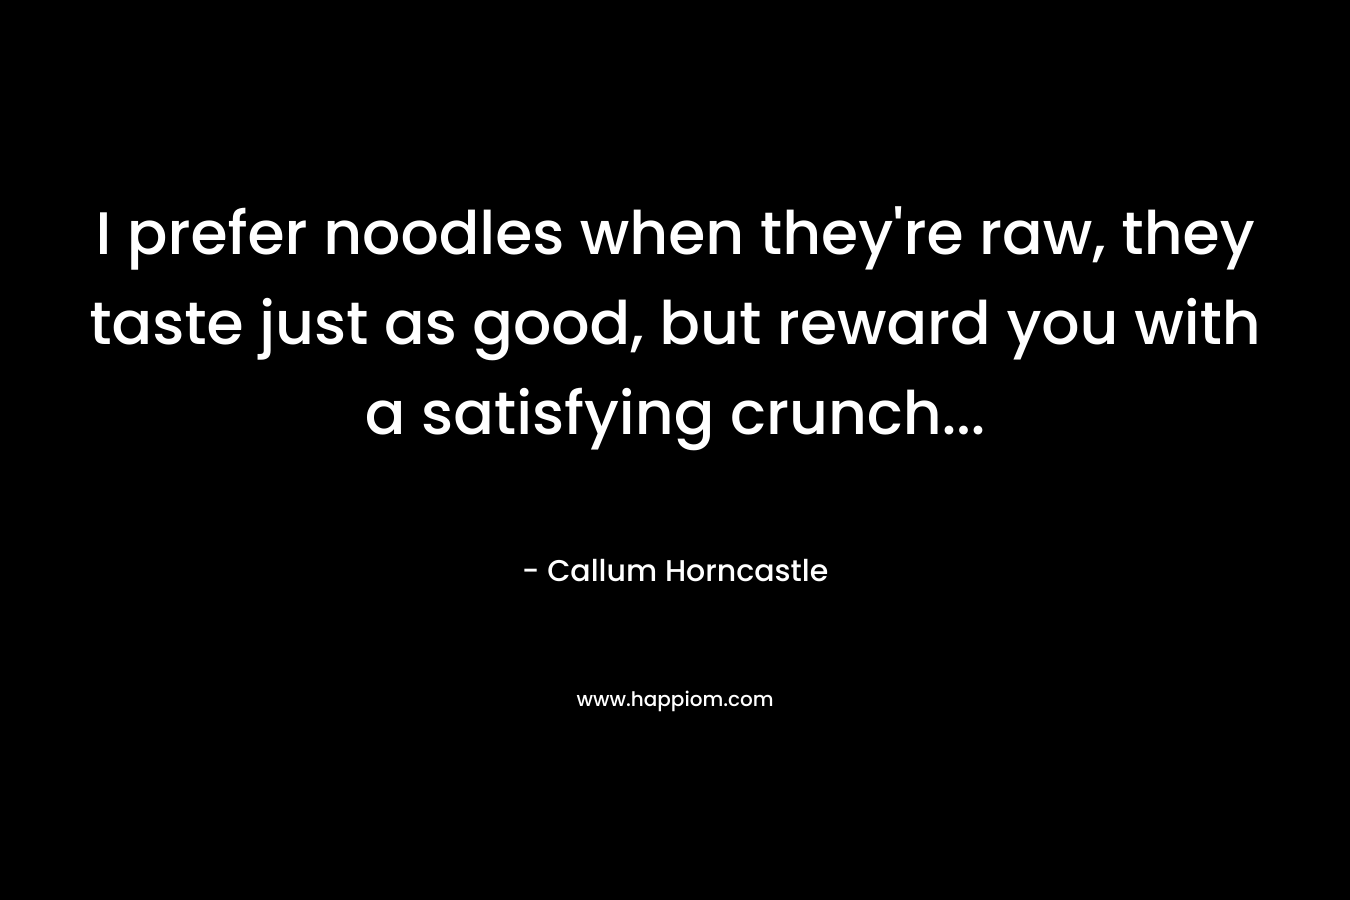 I prefer noodles when they're raw, they taste just as good, but reward you with a satisfying crunch...